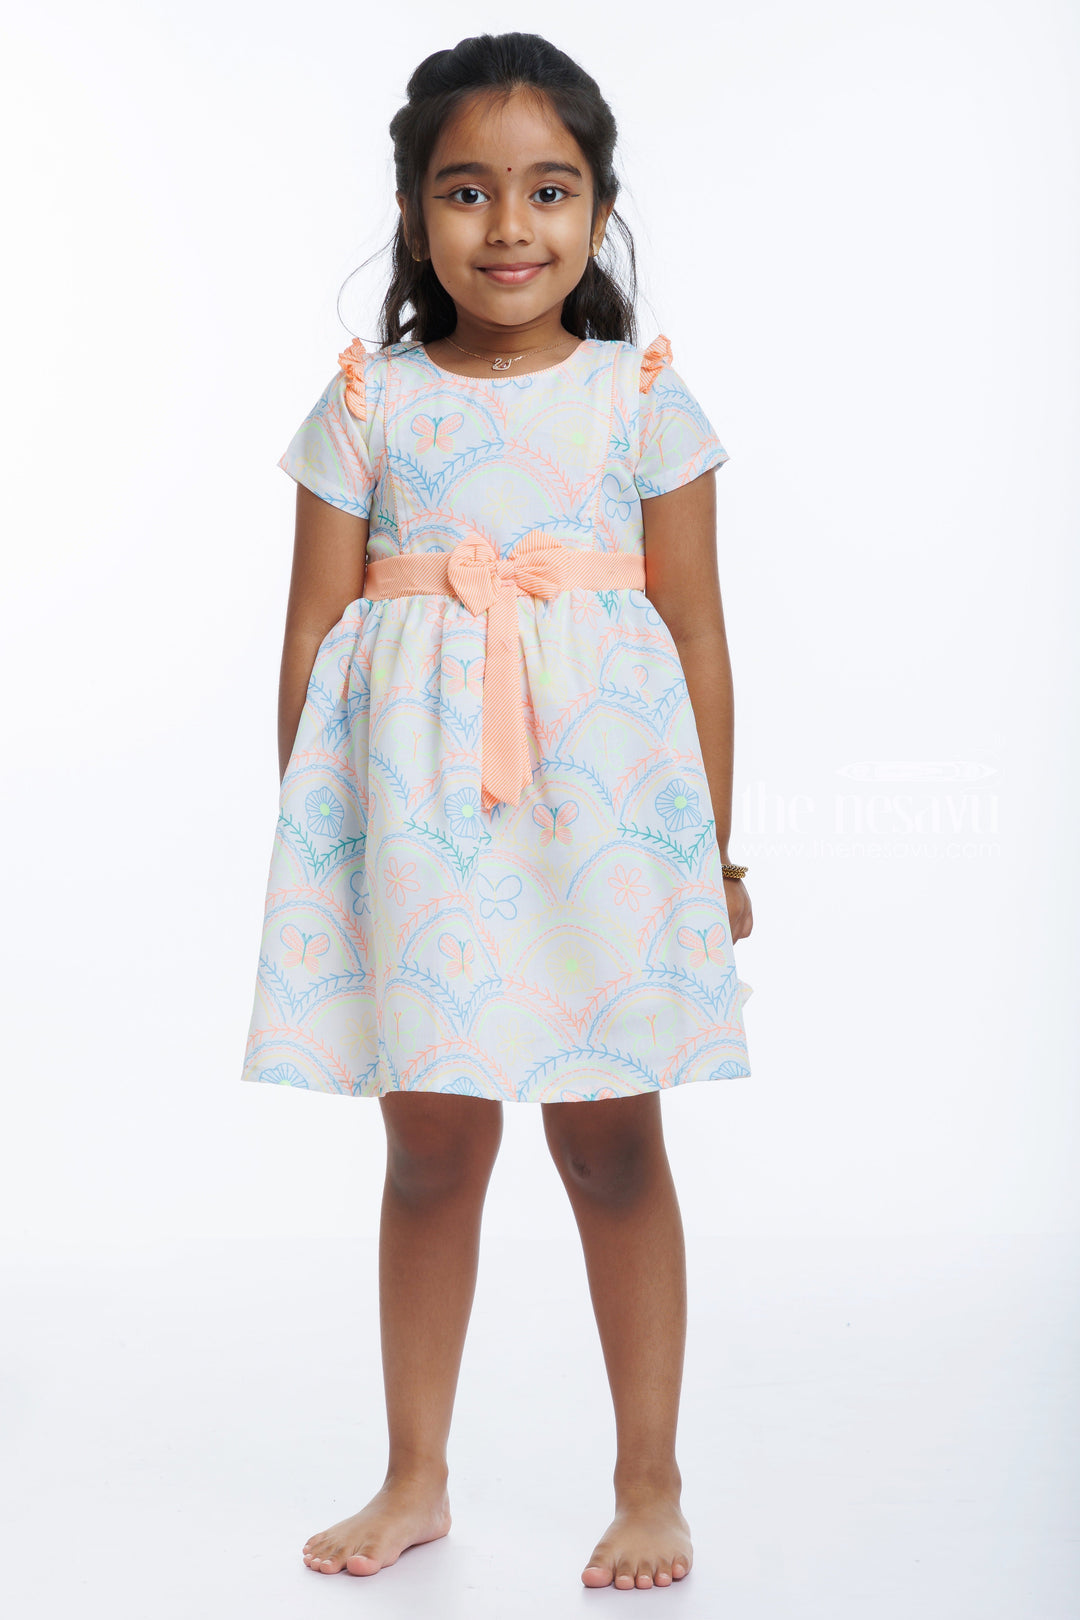 The Nesavu Girls Cotton Frock Charming Cotton Frock for Young Girls - Perfect for Festivities and Daily Wear Nesavu 20 (3Y) / Salmon / Cotton GFC1305A-20 Buy Girls A line Cotton Frocks Online | Festive  Casual Cotton Dresses for Girls | The Nesavu